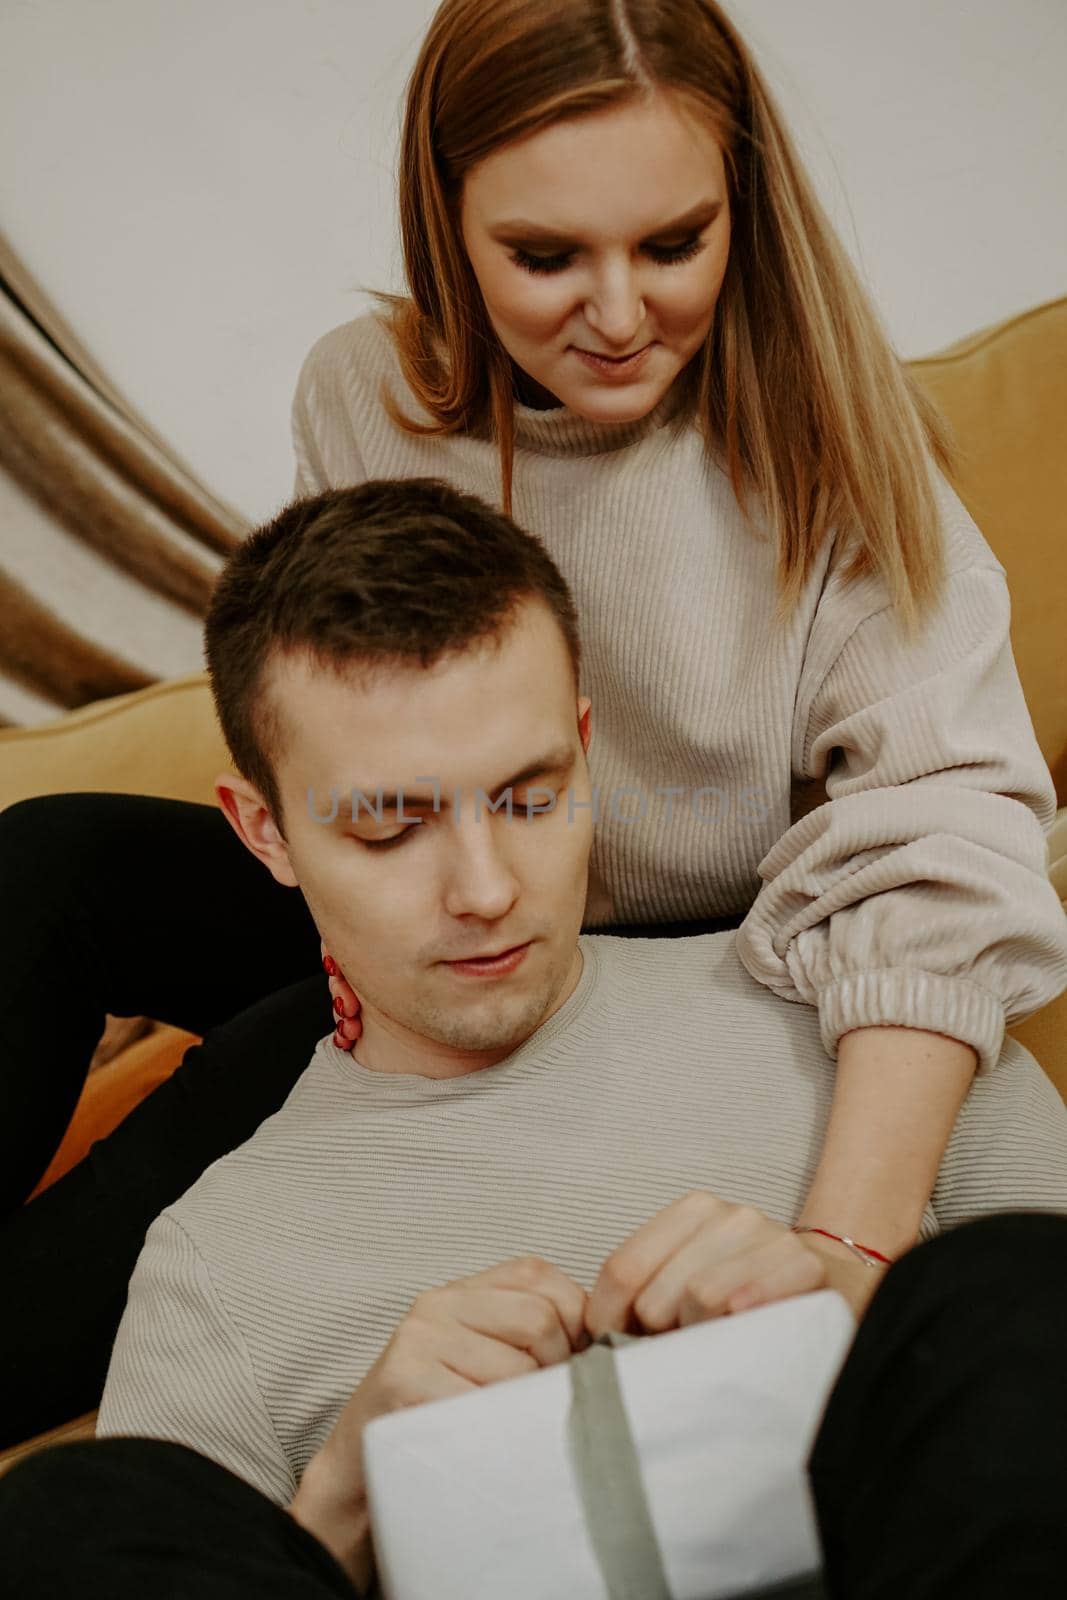 Beautiful young couple holding a gift box while sitting on couch at home - soft preset